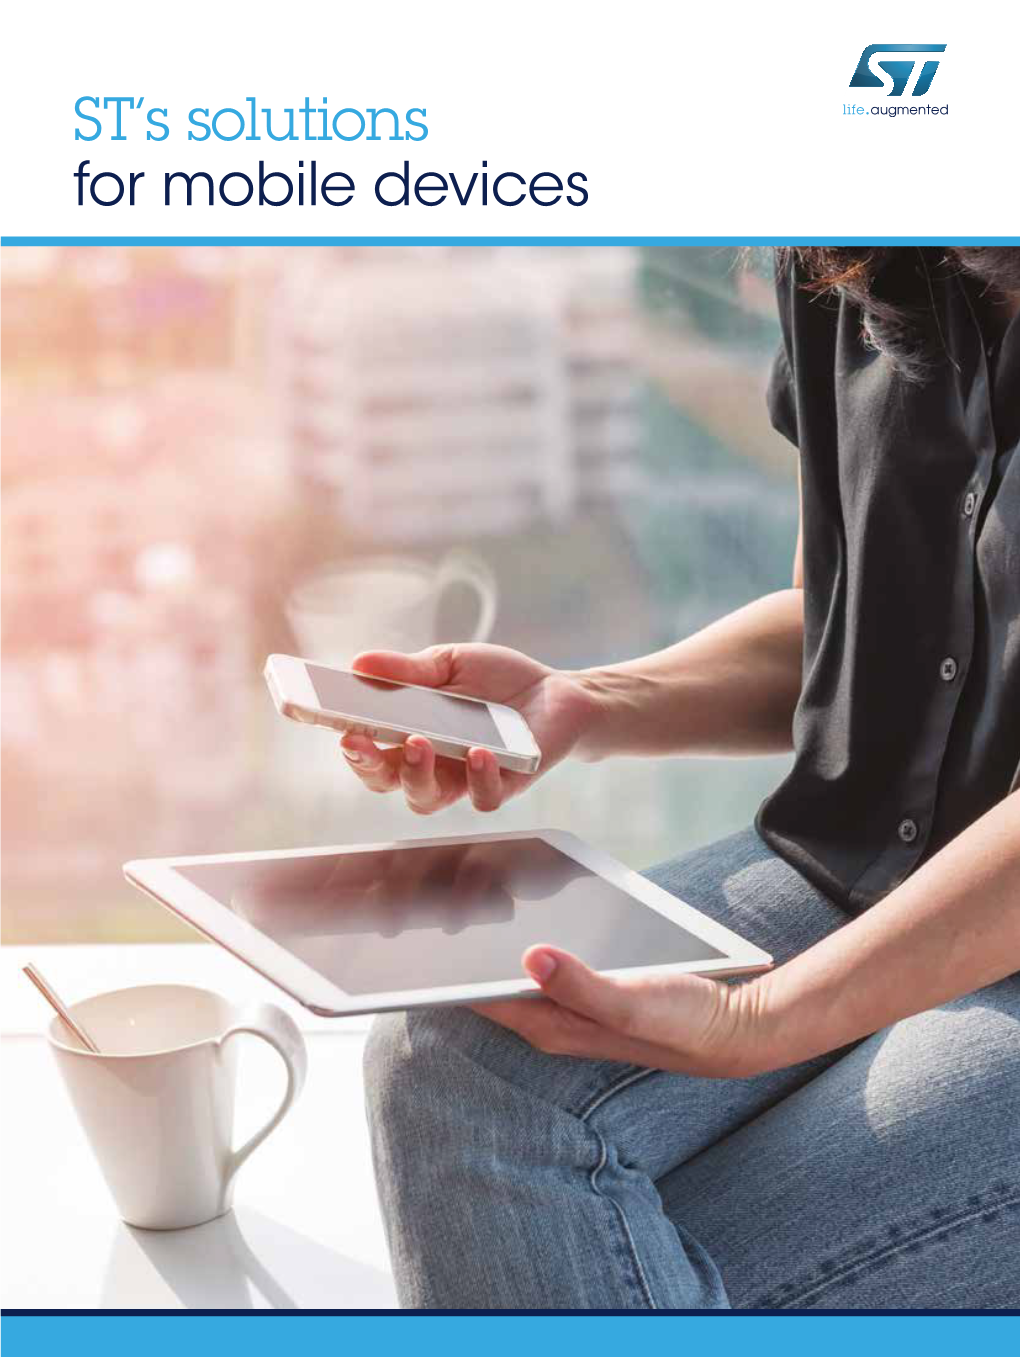 ST's Solutions for Mobile Devices